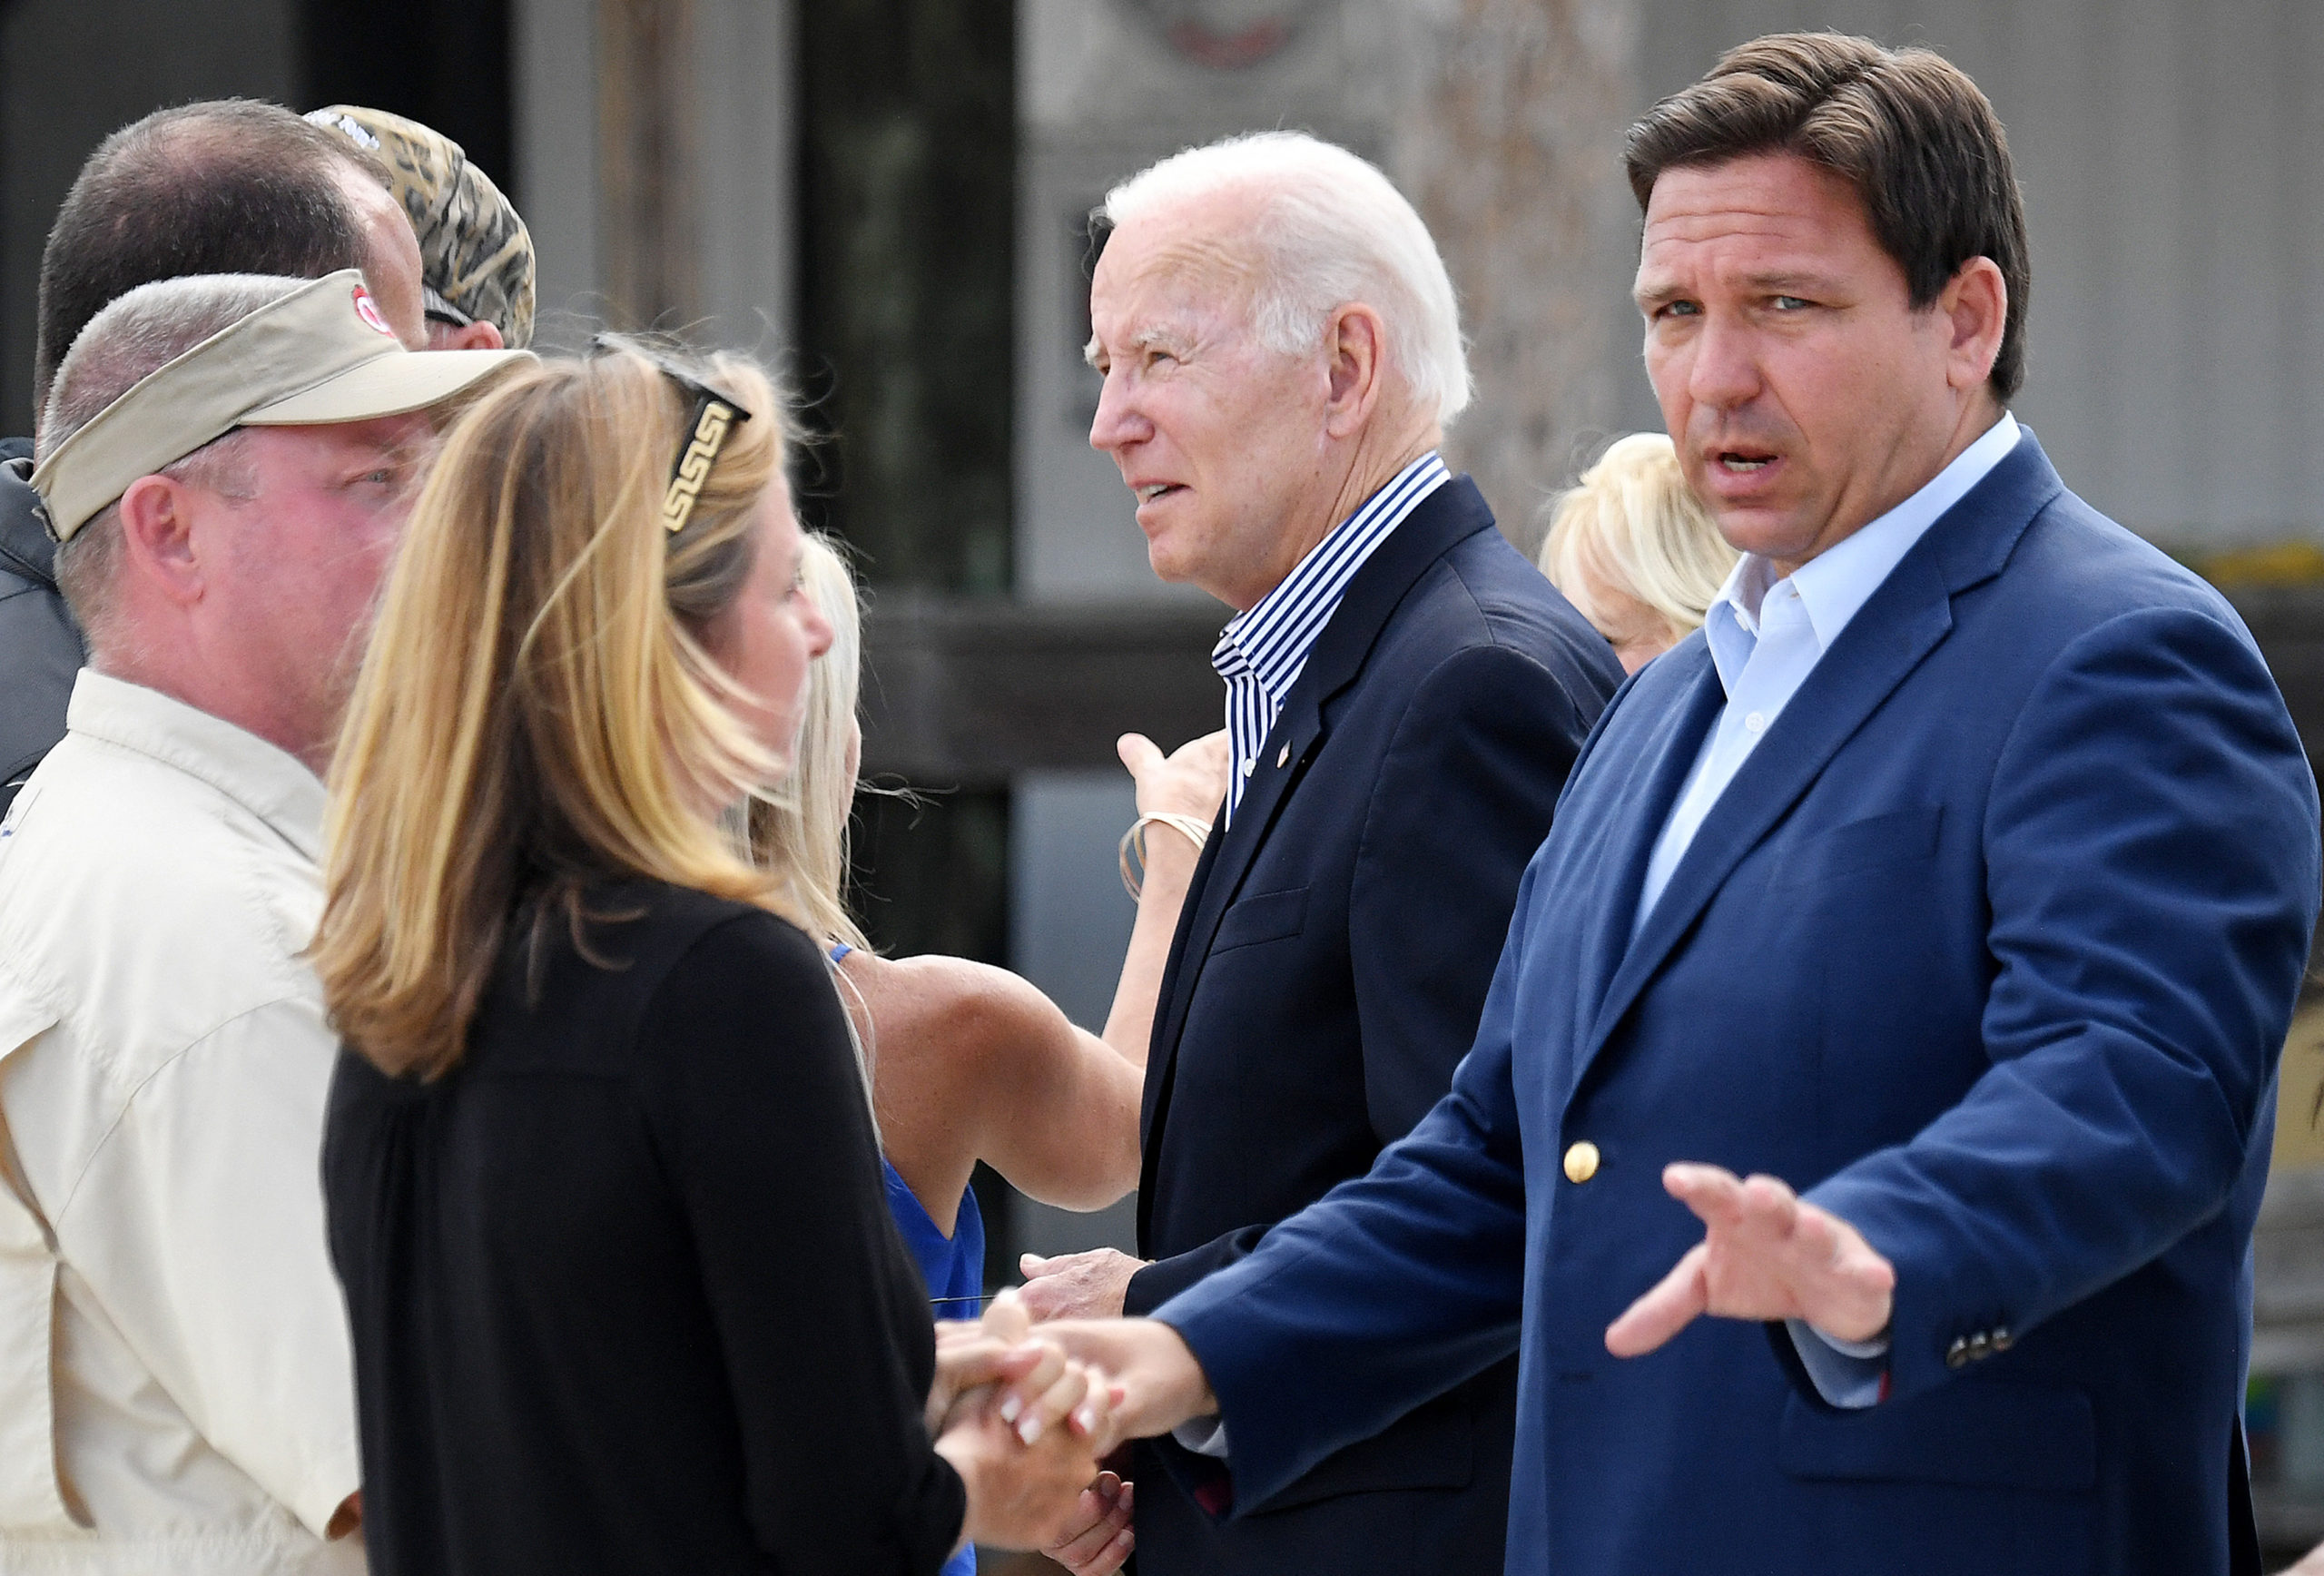 Florida Governor Ron DeSantis (R) and US President Joe Biden (C) speak with local residents impacted by Hurricane Ian at Fishermans Pass in Fort Myers, Florida, on October 5, 2022. (Photo by OLIVIER DOULIERY / AFP) (Photo by OLIVIER DOULIERY/AFP via Getty Images)